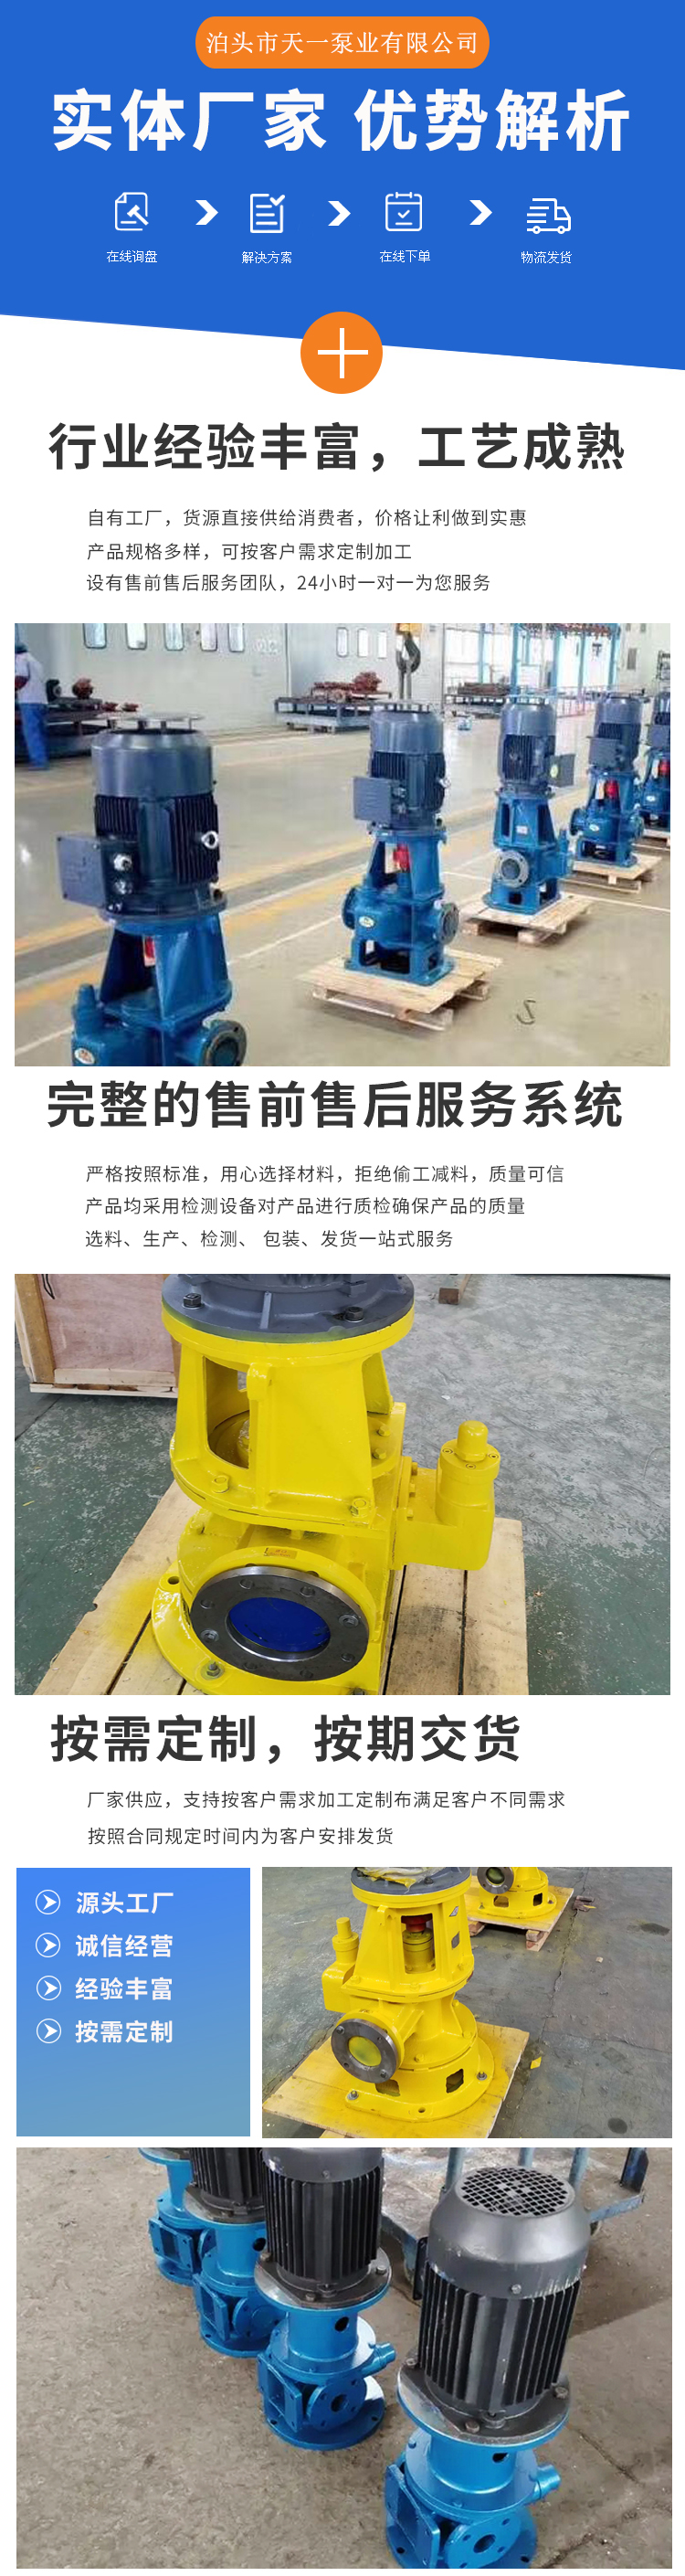 3G36 screw pump marine fuel pump can be customized, and Tianyi Pump has no leakage